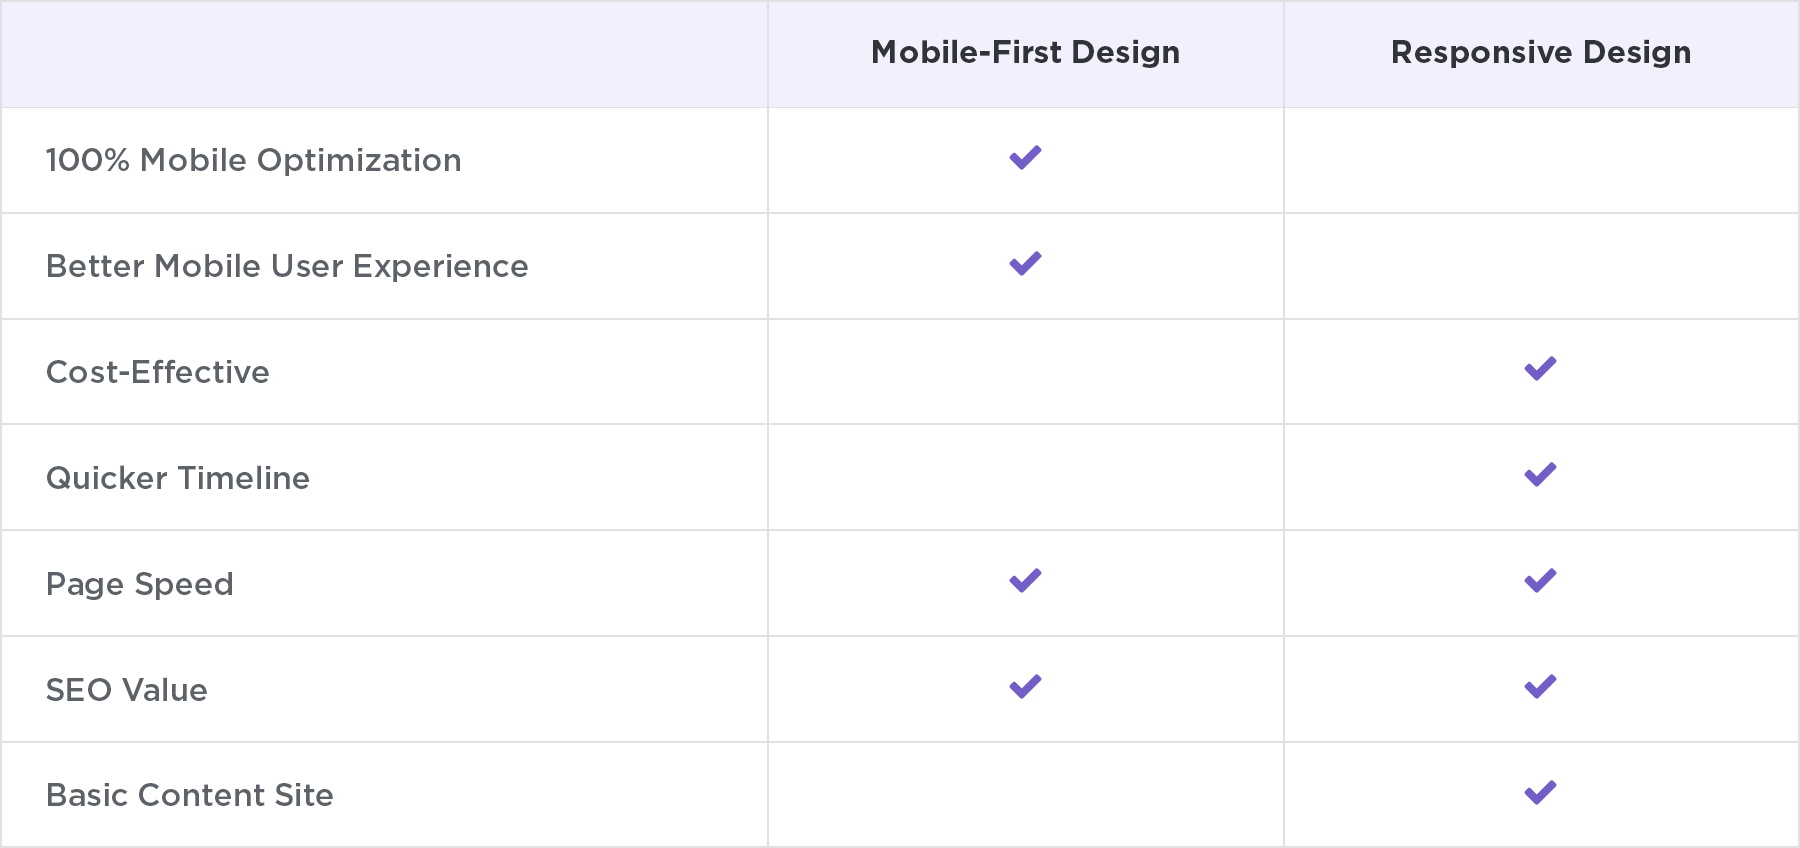 comparison of Mobile-First Design and Responsive Design